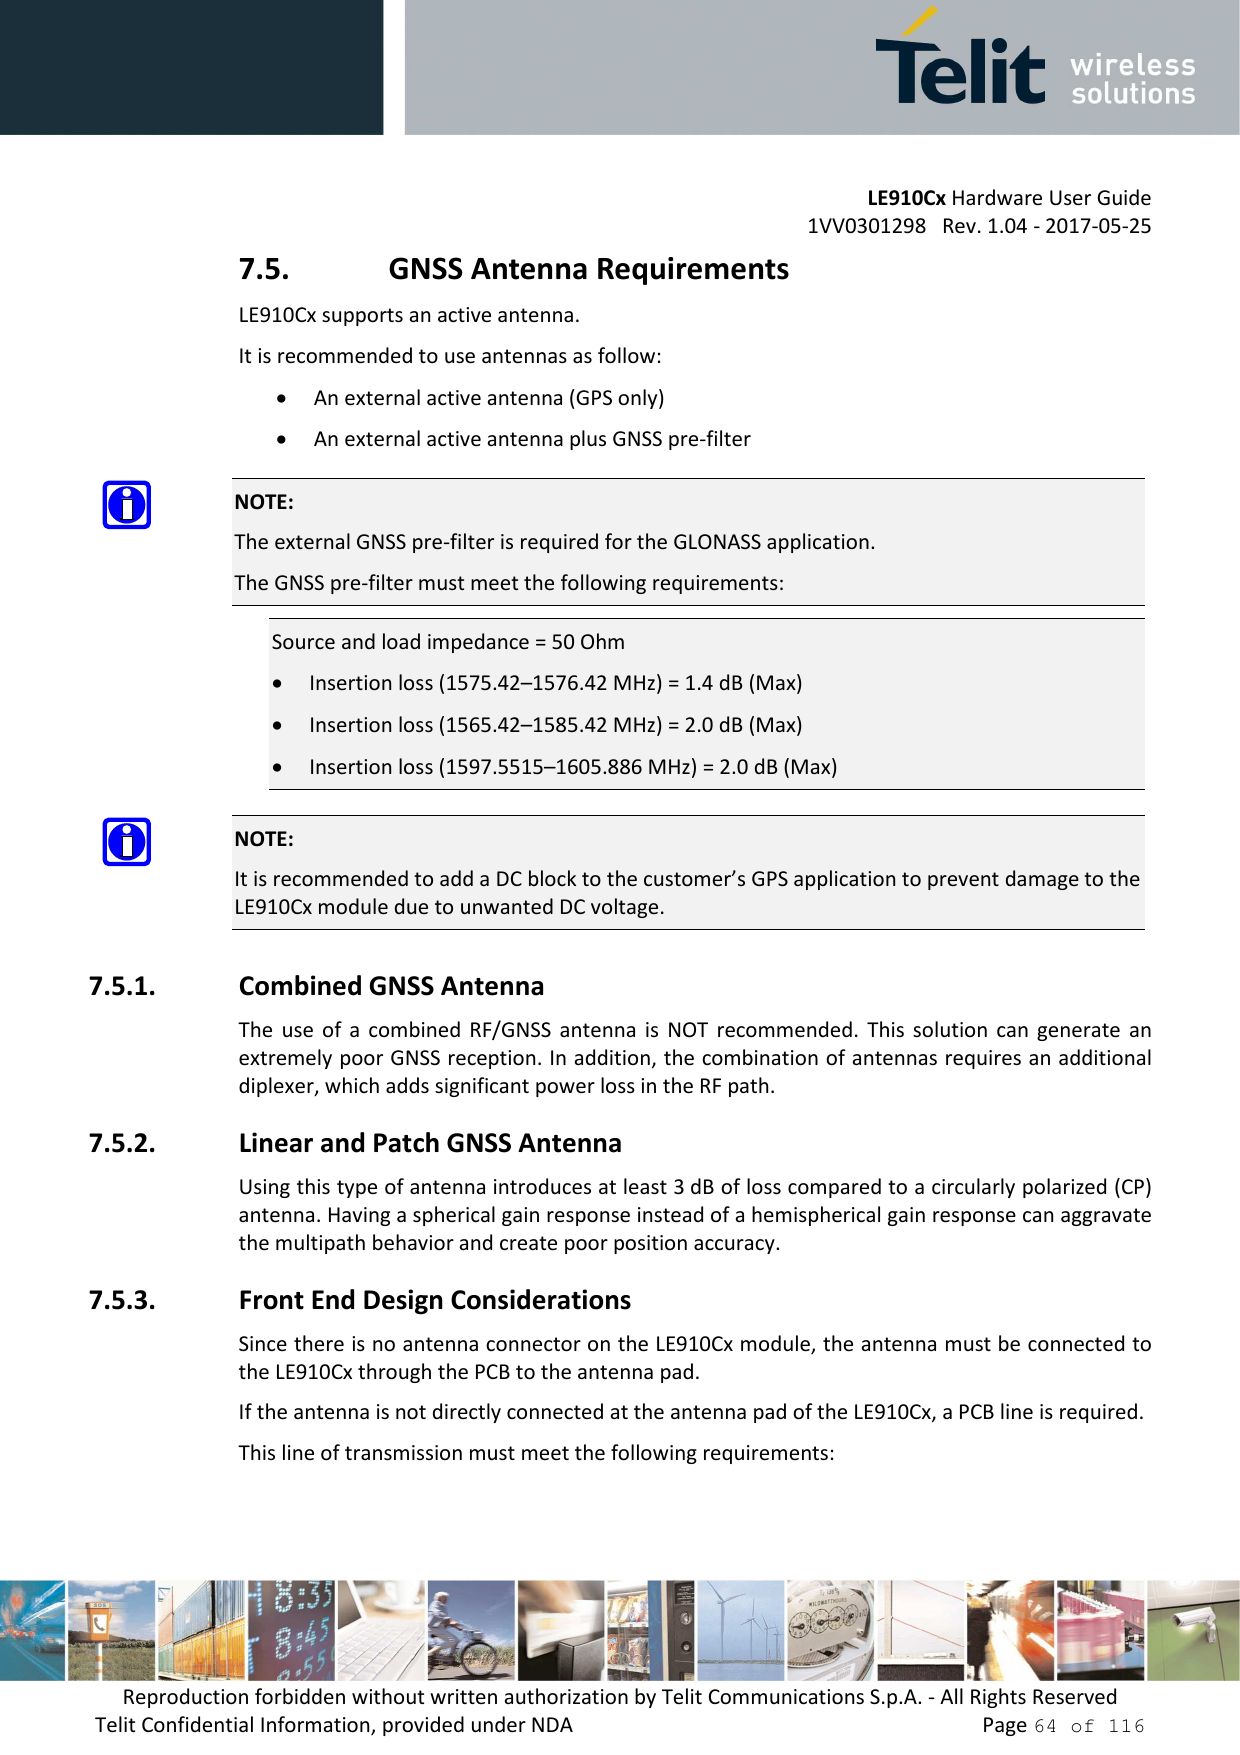         LE910Cx Hardware User Guide 1VV0301298   Rev. 1.04 - 2017-05-25 Reproduction forbidden without written authorization by Telit Communications S.p.A. - All Rights Reserved Telit Confidential Information, provided under NDA                 Page 64 of 116 7.5. GNSS Antenna Requirements LE910Cx supports an active antenna. It is recommended to use antennas as follow: • An external active antenna (GPS only) • An external active antenna plus GNSS pre-filter  NOTE: The external GNSS pre-filter is required for the GLONASS application. The GNSS pre-filter must meet the following requirements: Source and load impedance = 50 Ohm • Insertion loss (1575.42–1576.42 MHz) = 1.4 dB (Max) • Insertion loss (1565.42–1585.42 MHz) = 2.0 dB (Max) • Insertion loss (1597.5515–1605.886 MHz) = 2.0 dB (Max)  NOTE: It is recommended to add a DC block to the customer’s GPS application to prevent damage to the LE910Cx module due to unwanted DC voltage. 7.5.1. Combined GNSS Antenna The  use of  a  combined RF/GNSS  antenna  is  NOT  recommended.  This  solution can  generate  an extremely poor GNSS reception. In addition, the combination of antennas requires an additional diplexer, which adds significant power loss in the RF path. 7.5.2. Linear and Patch GNSS Antenna Using this type of antenna introduces at least 3 dB of loss compared to a circularly polarized (CP) antenna. Having a spherical gain response instead of a hemispherical gain response can aggravate the multipath behavior and create poor position accuracy. 7.5.3. Front End Design Considerations Since there is no antenna connector on the LE910Cx module, the antenna must be connected to the LE910Cx through the PCB to the antenna pad.  If the antenna is not directly connected at the antenna pad of the LE910Cx, a PCB line is required. This line of transmission must meet the following requirements: 